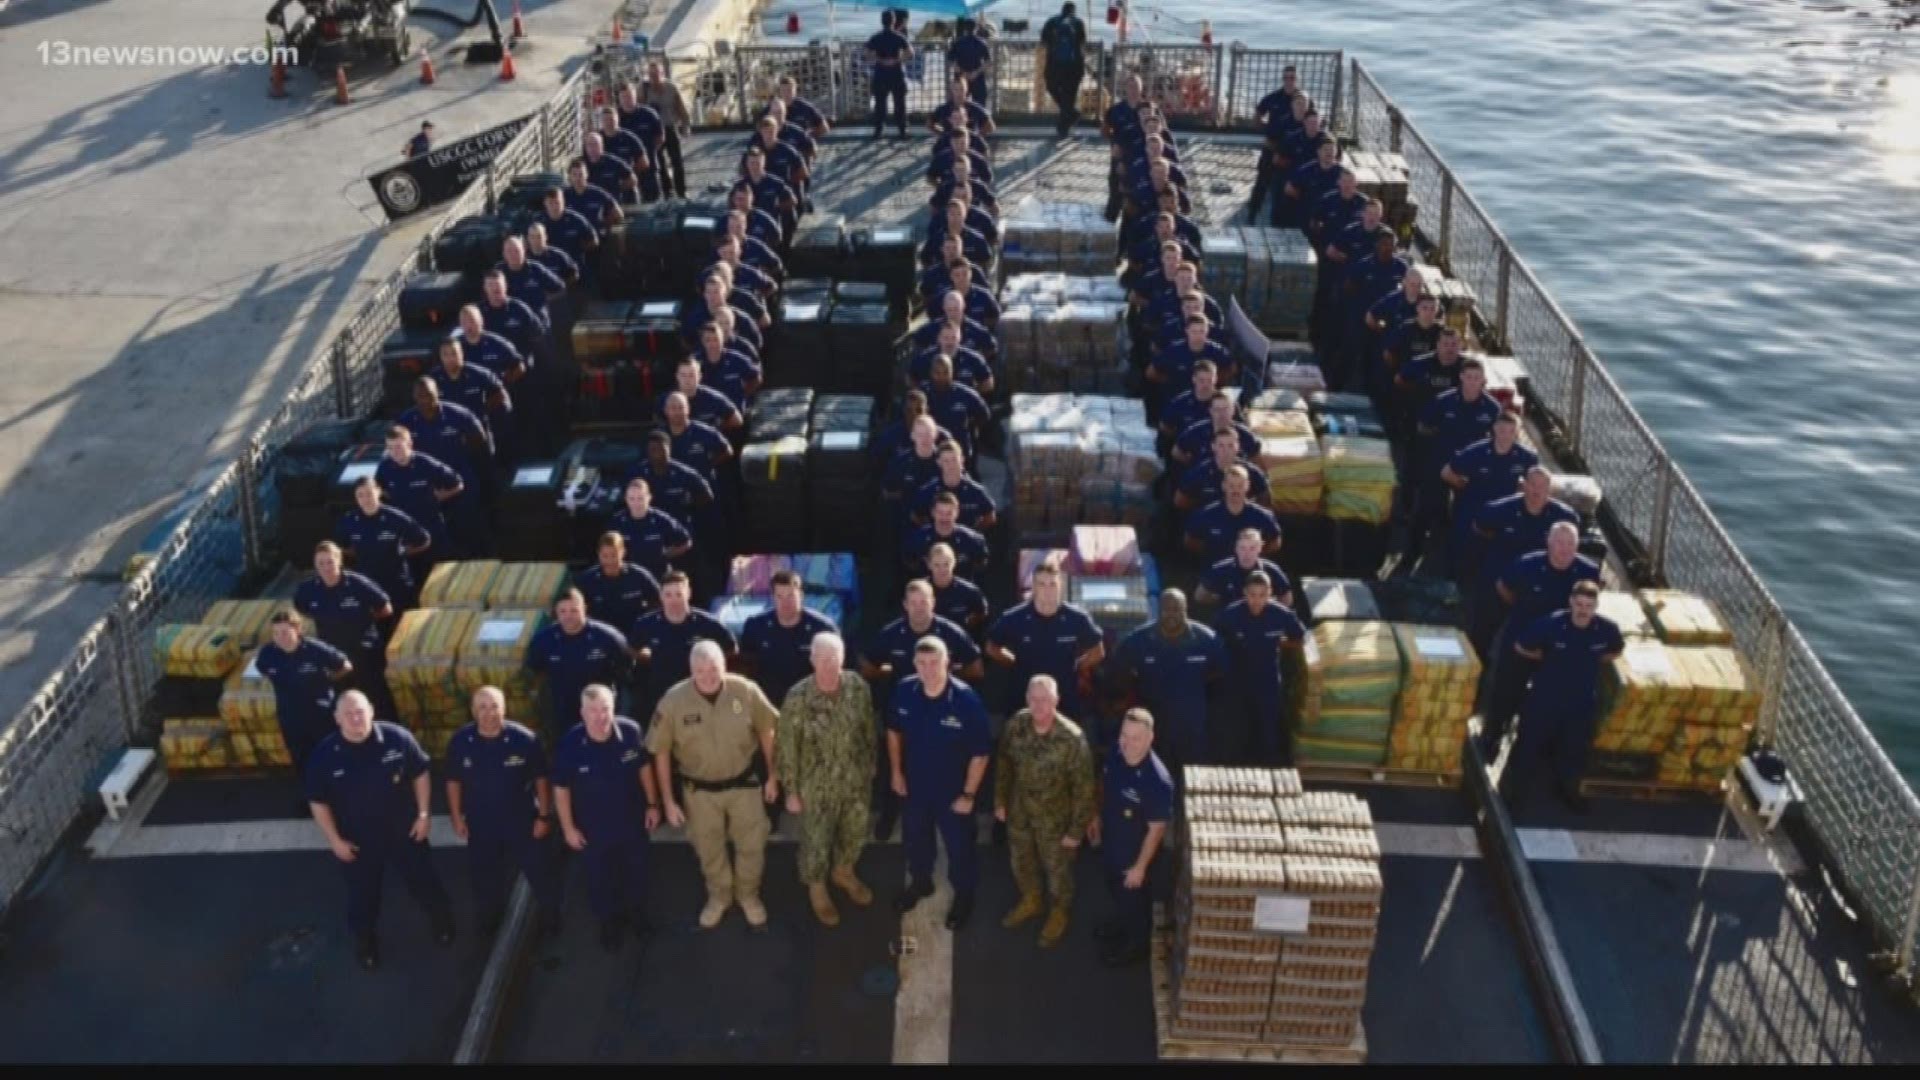 A Portsmouth-based U.S. Coast Guard crew seized more than 14,000 pounds of cocaine during the shutdown.